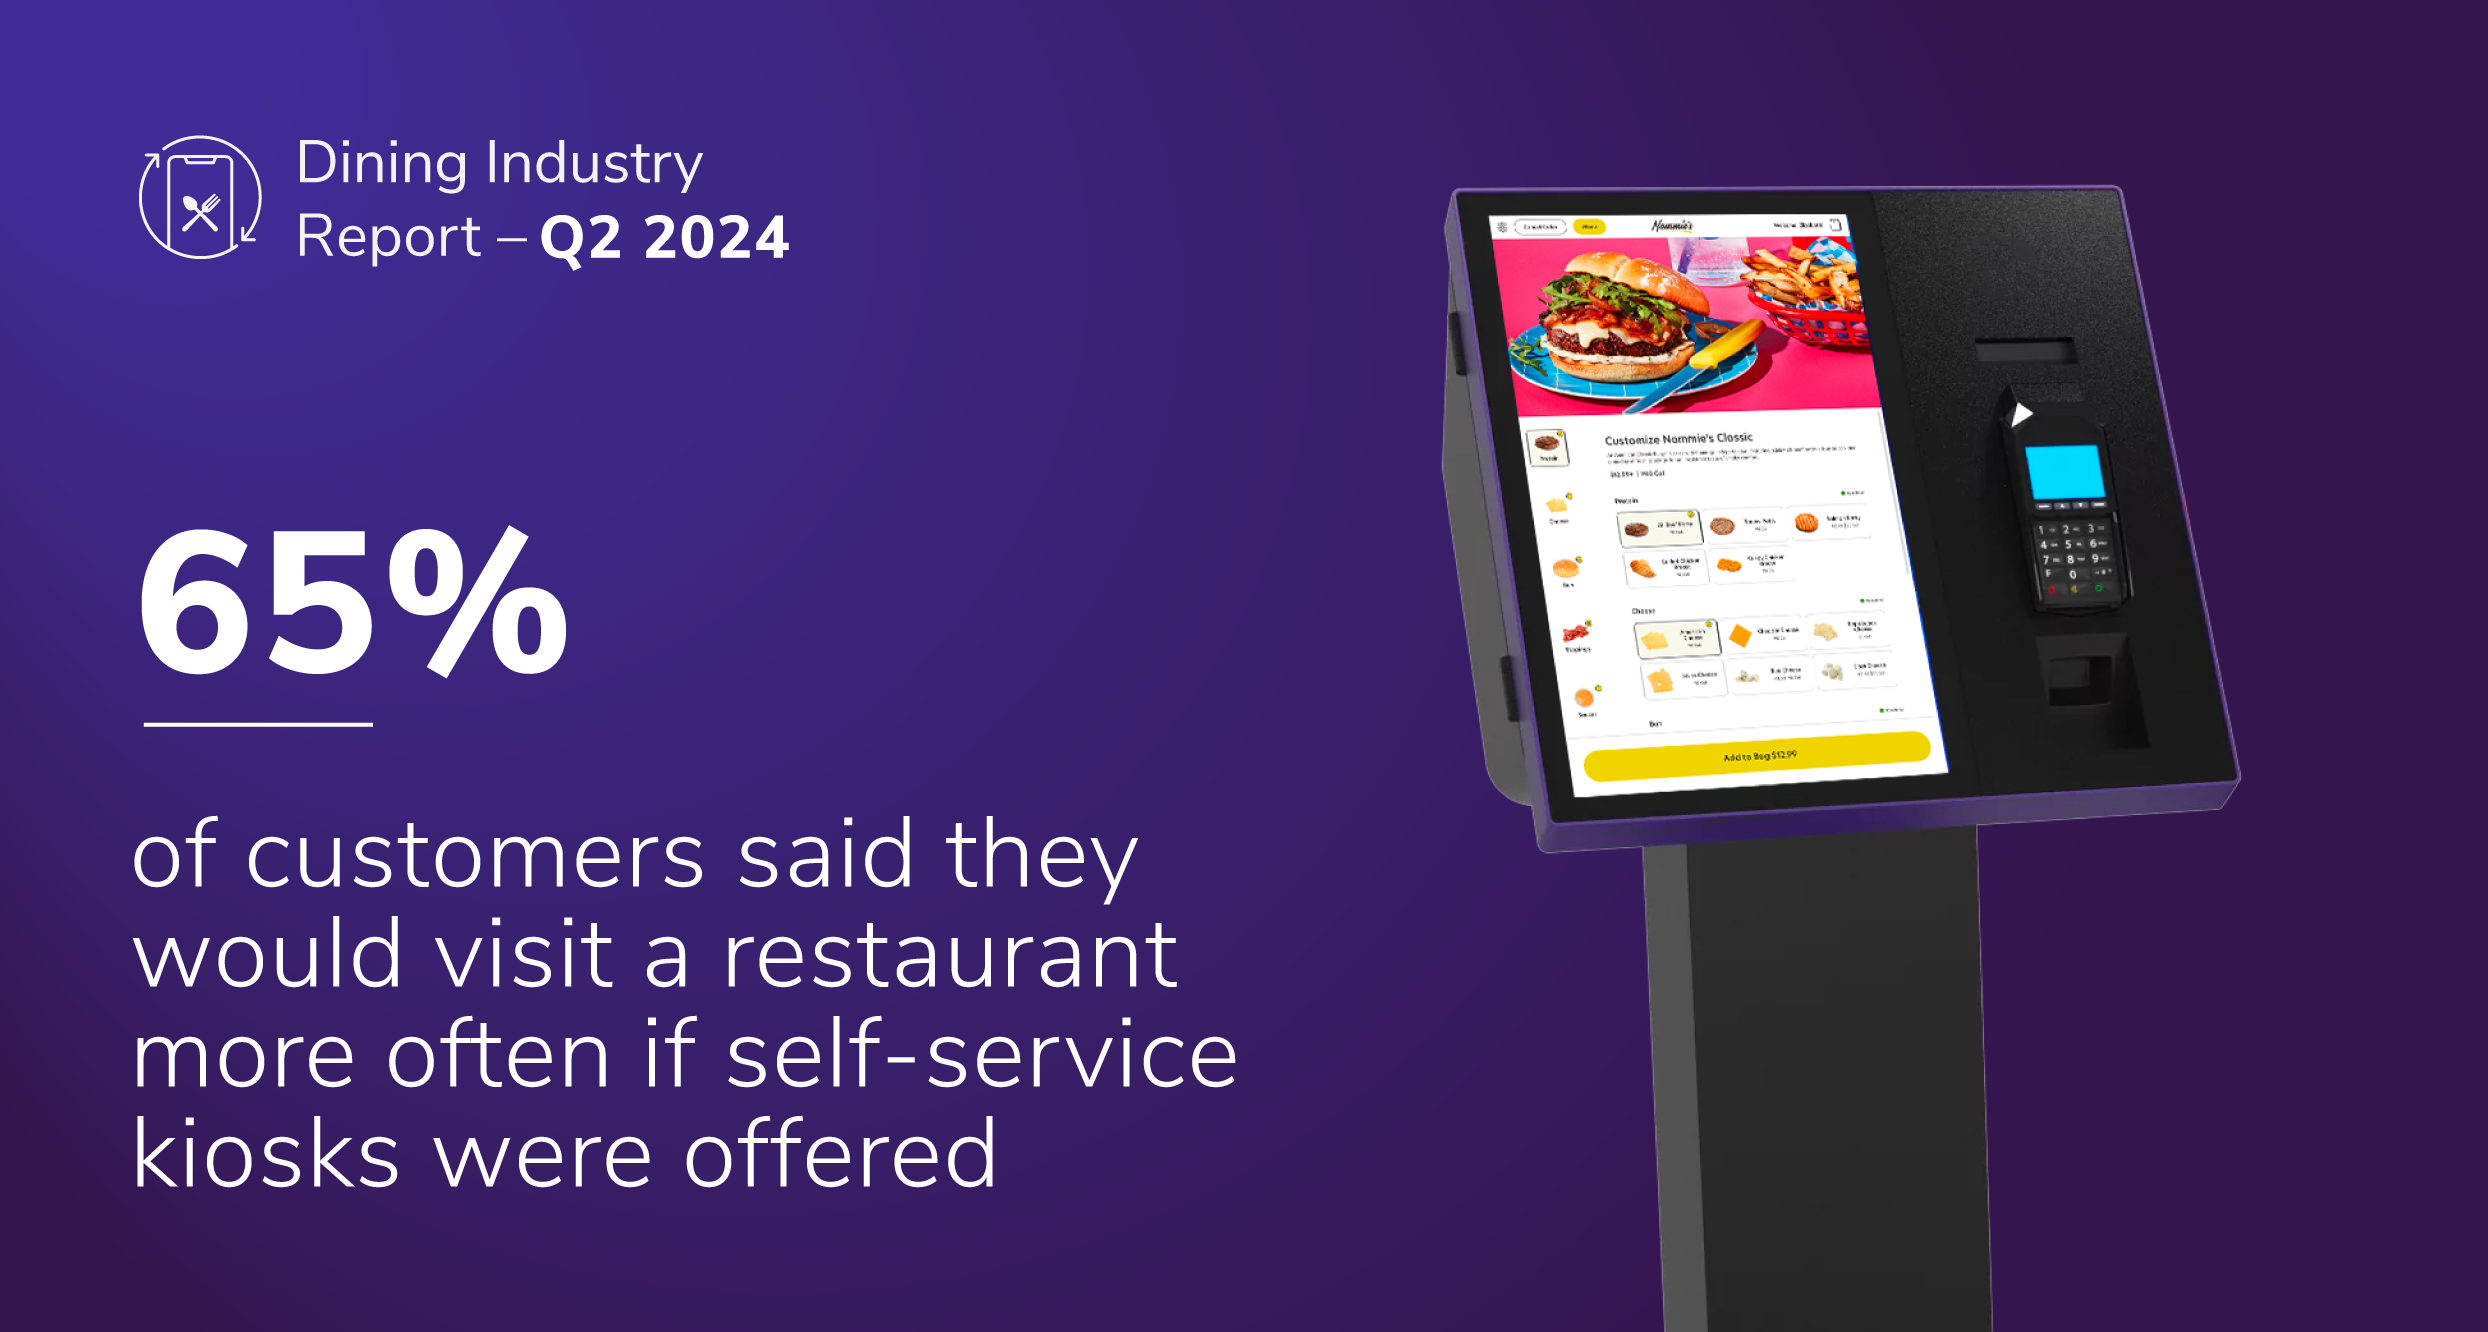 65% of customers said they would visit a restaurant more if self-service kiosks were offered